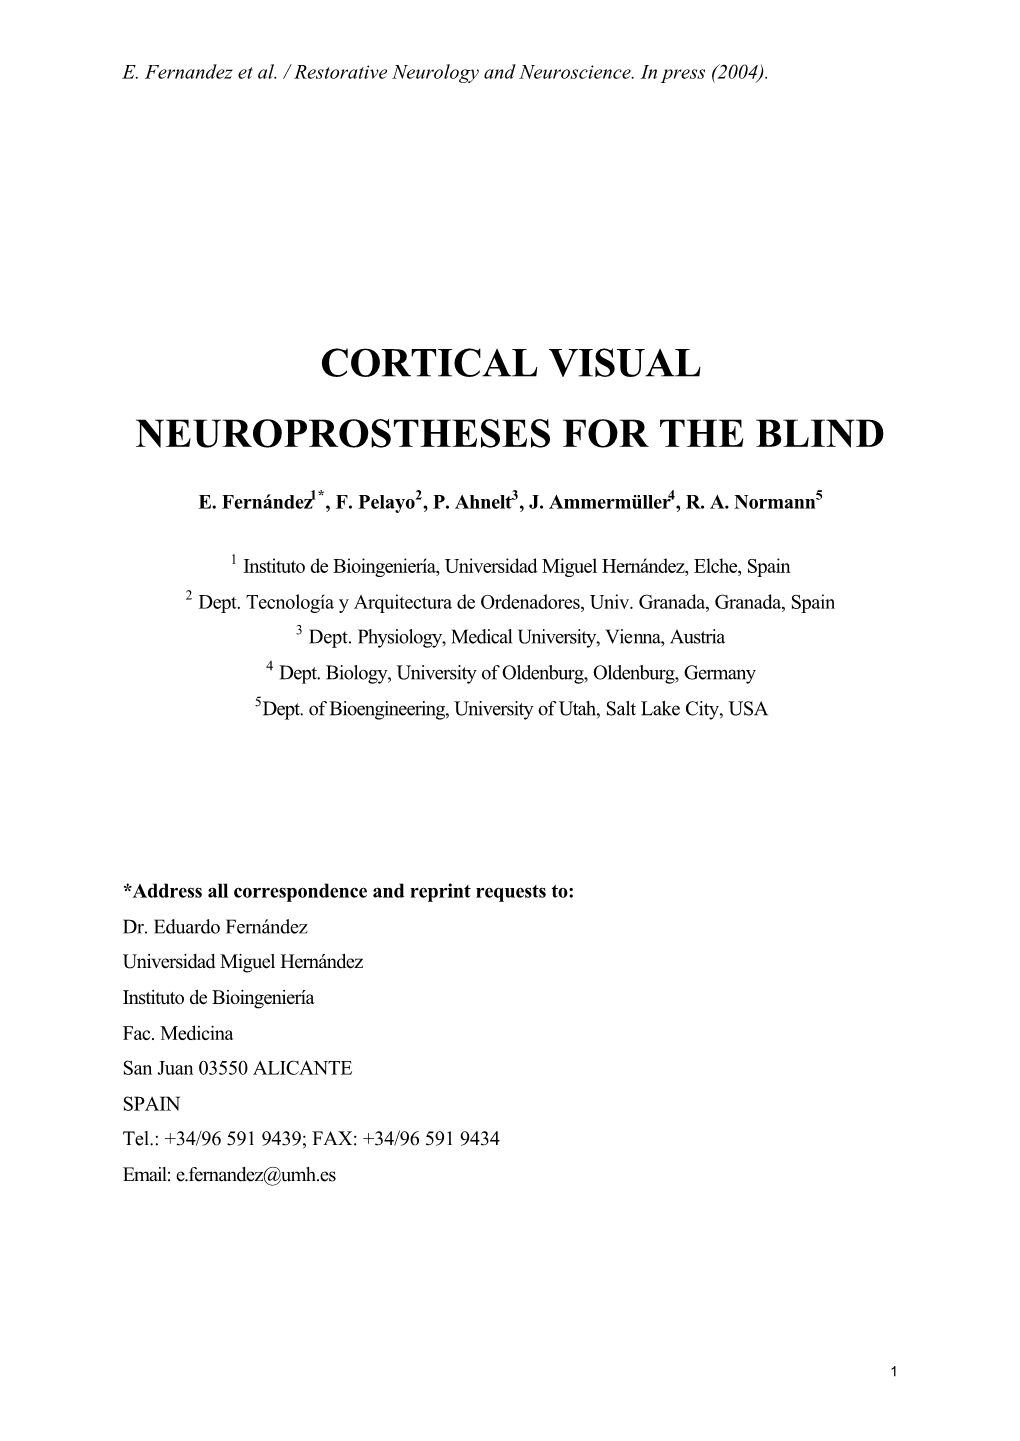 Cortical Visual Neuroprostheses for the Blind